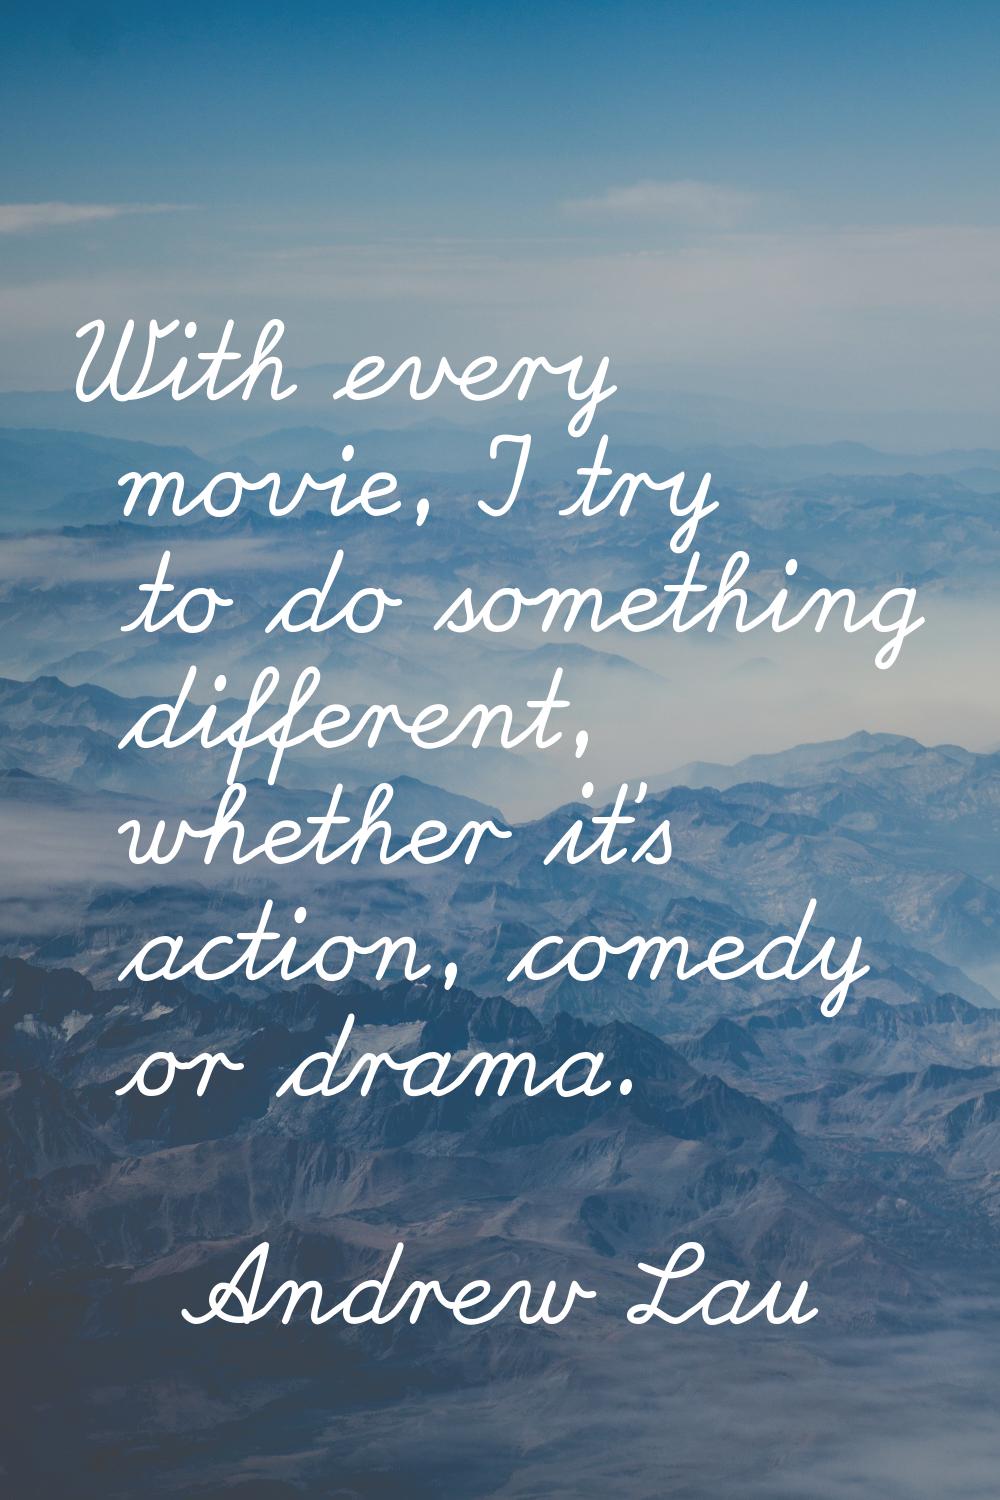 With every movie, I try to do something different, whether it's action, comedy or drama.